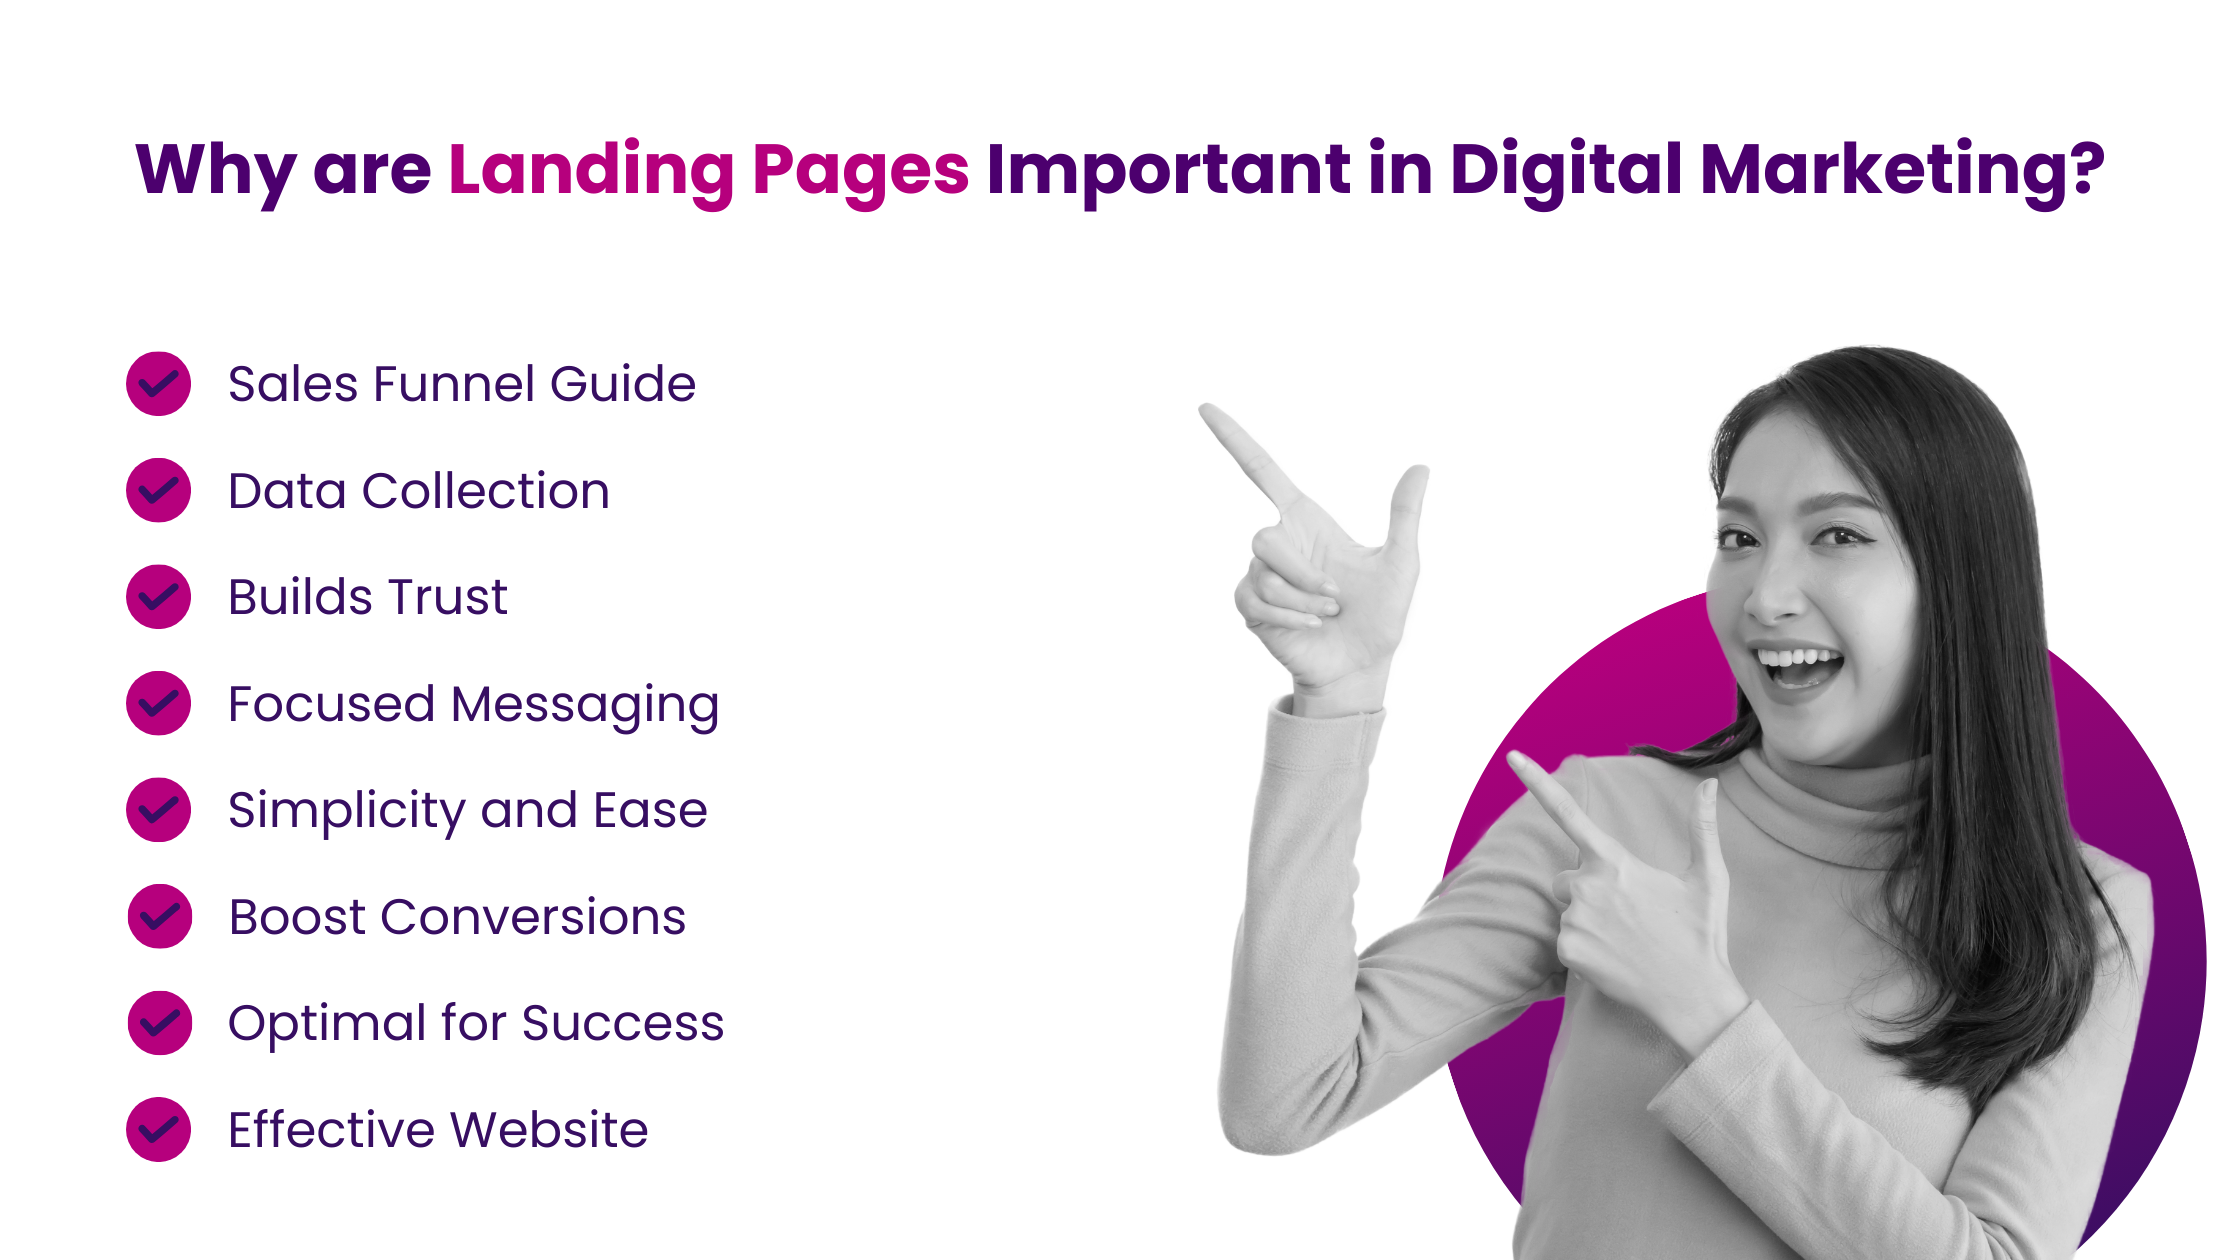 Why are Landing Pages Important in Digital Marketing